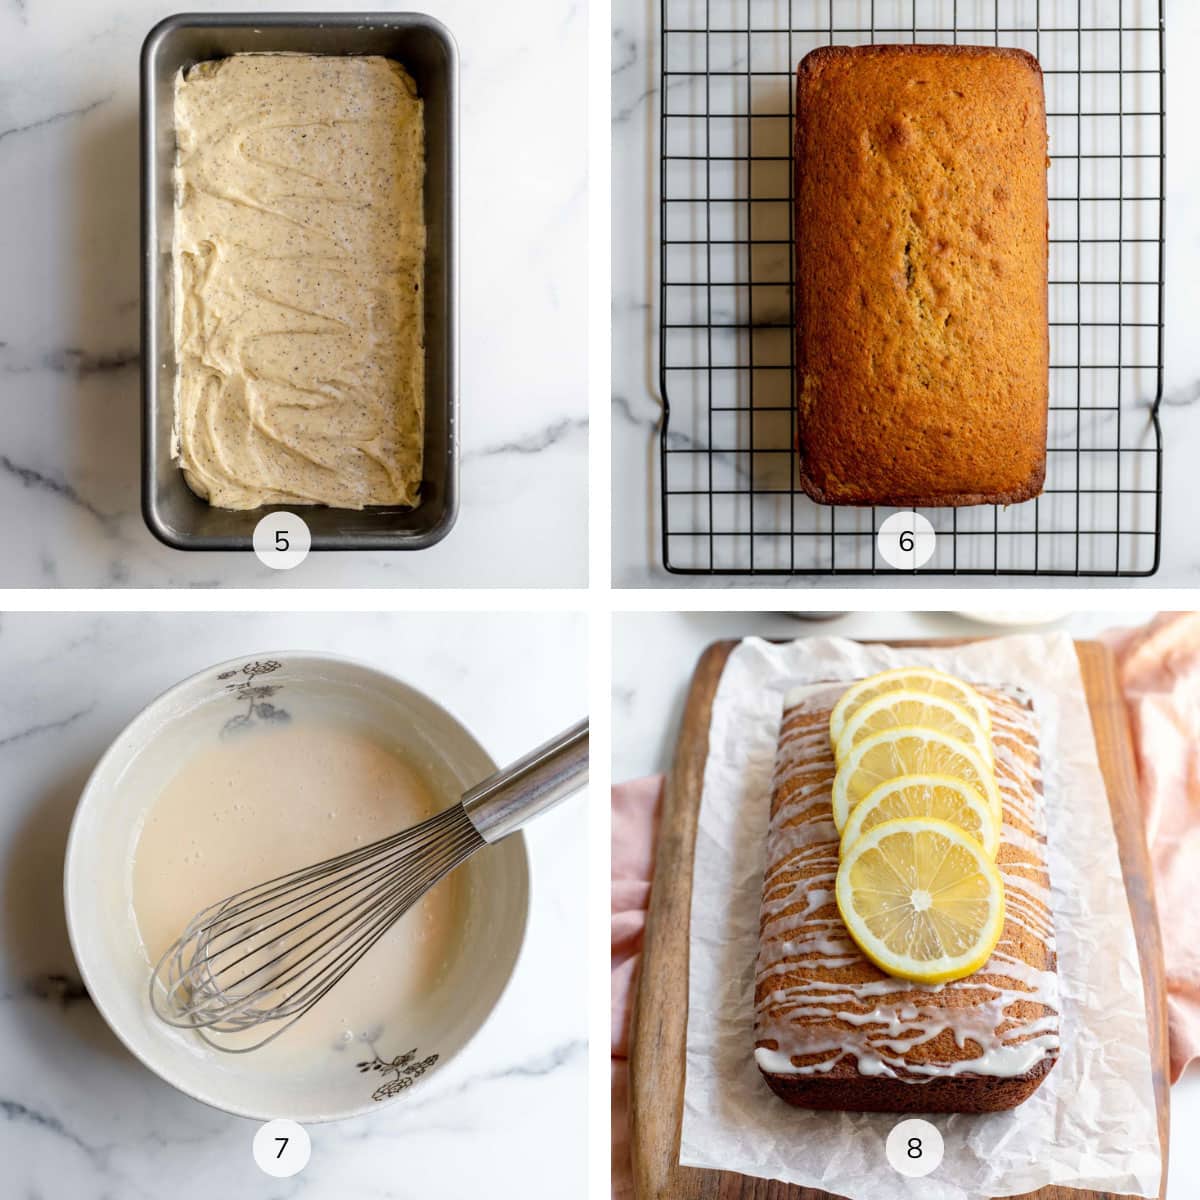 Photos showing how to make earl grey and lemon loaf cake labeled 5, 6, 7, 8